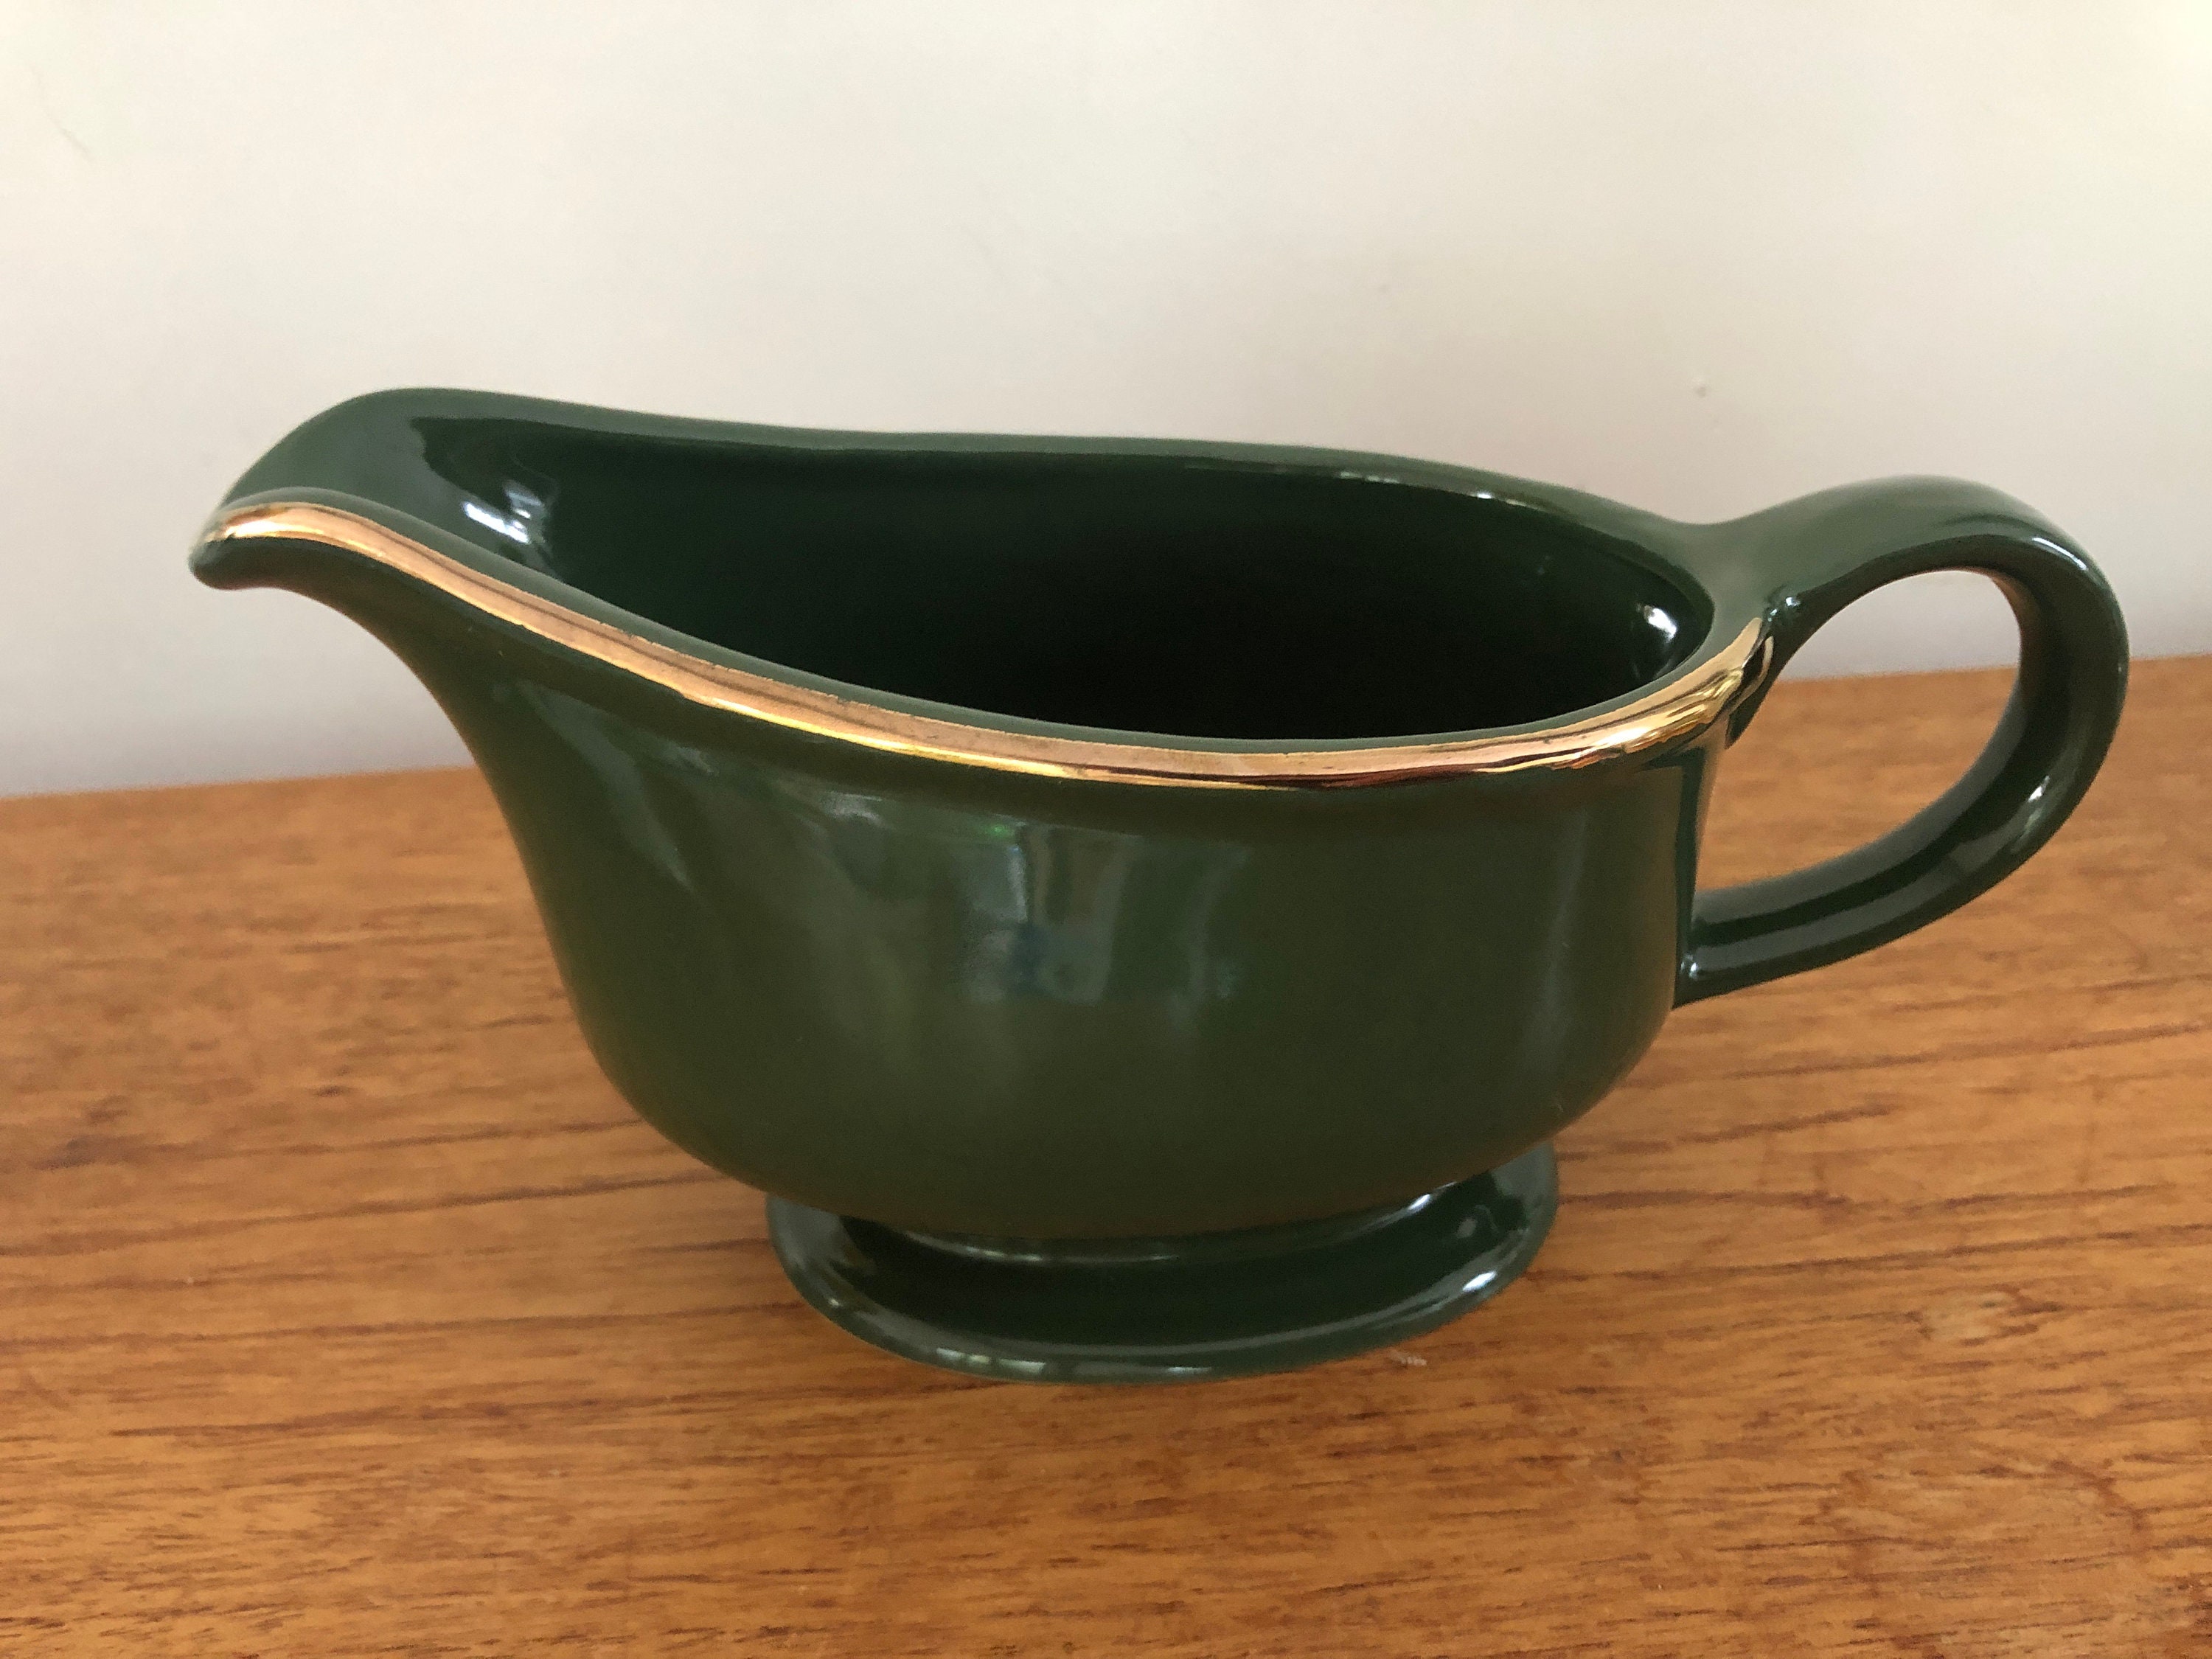 Up To 50% Off on Ceramic Gravy Boat with Warmer